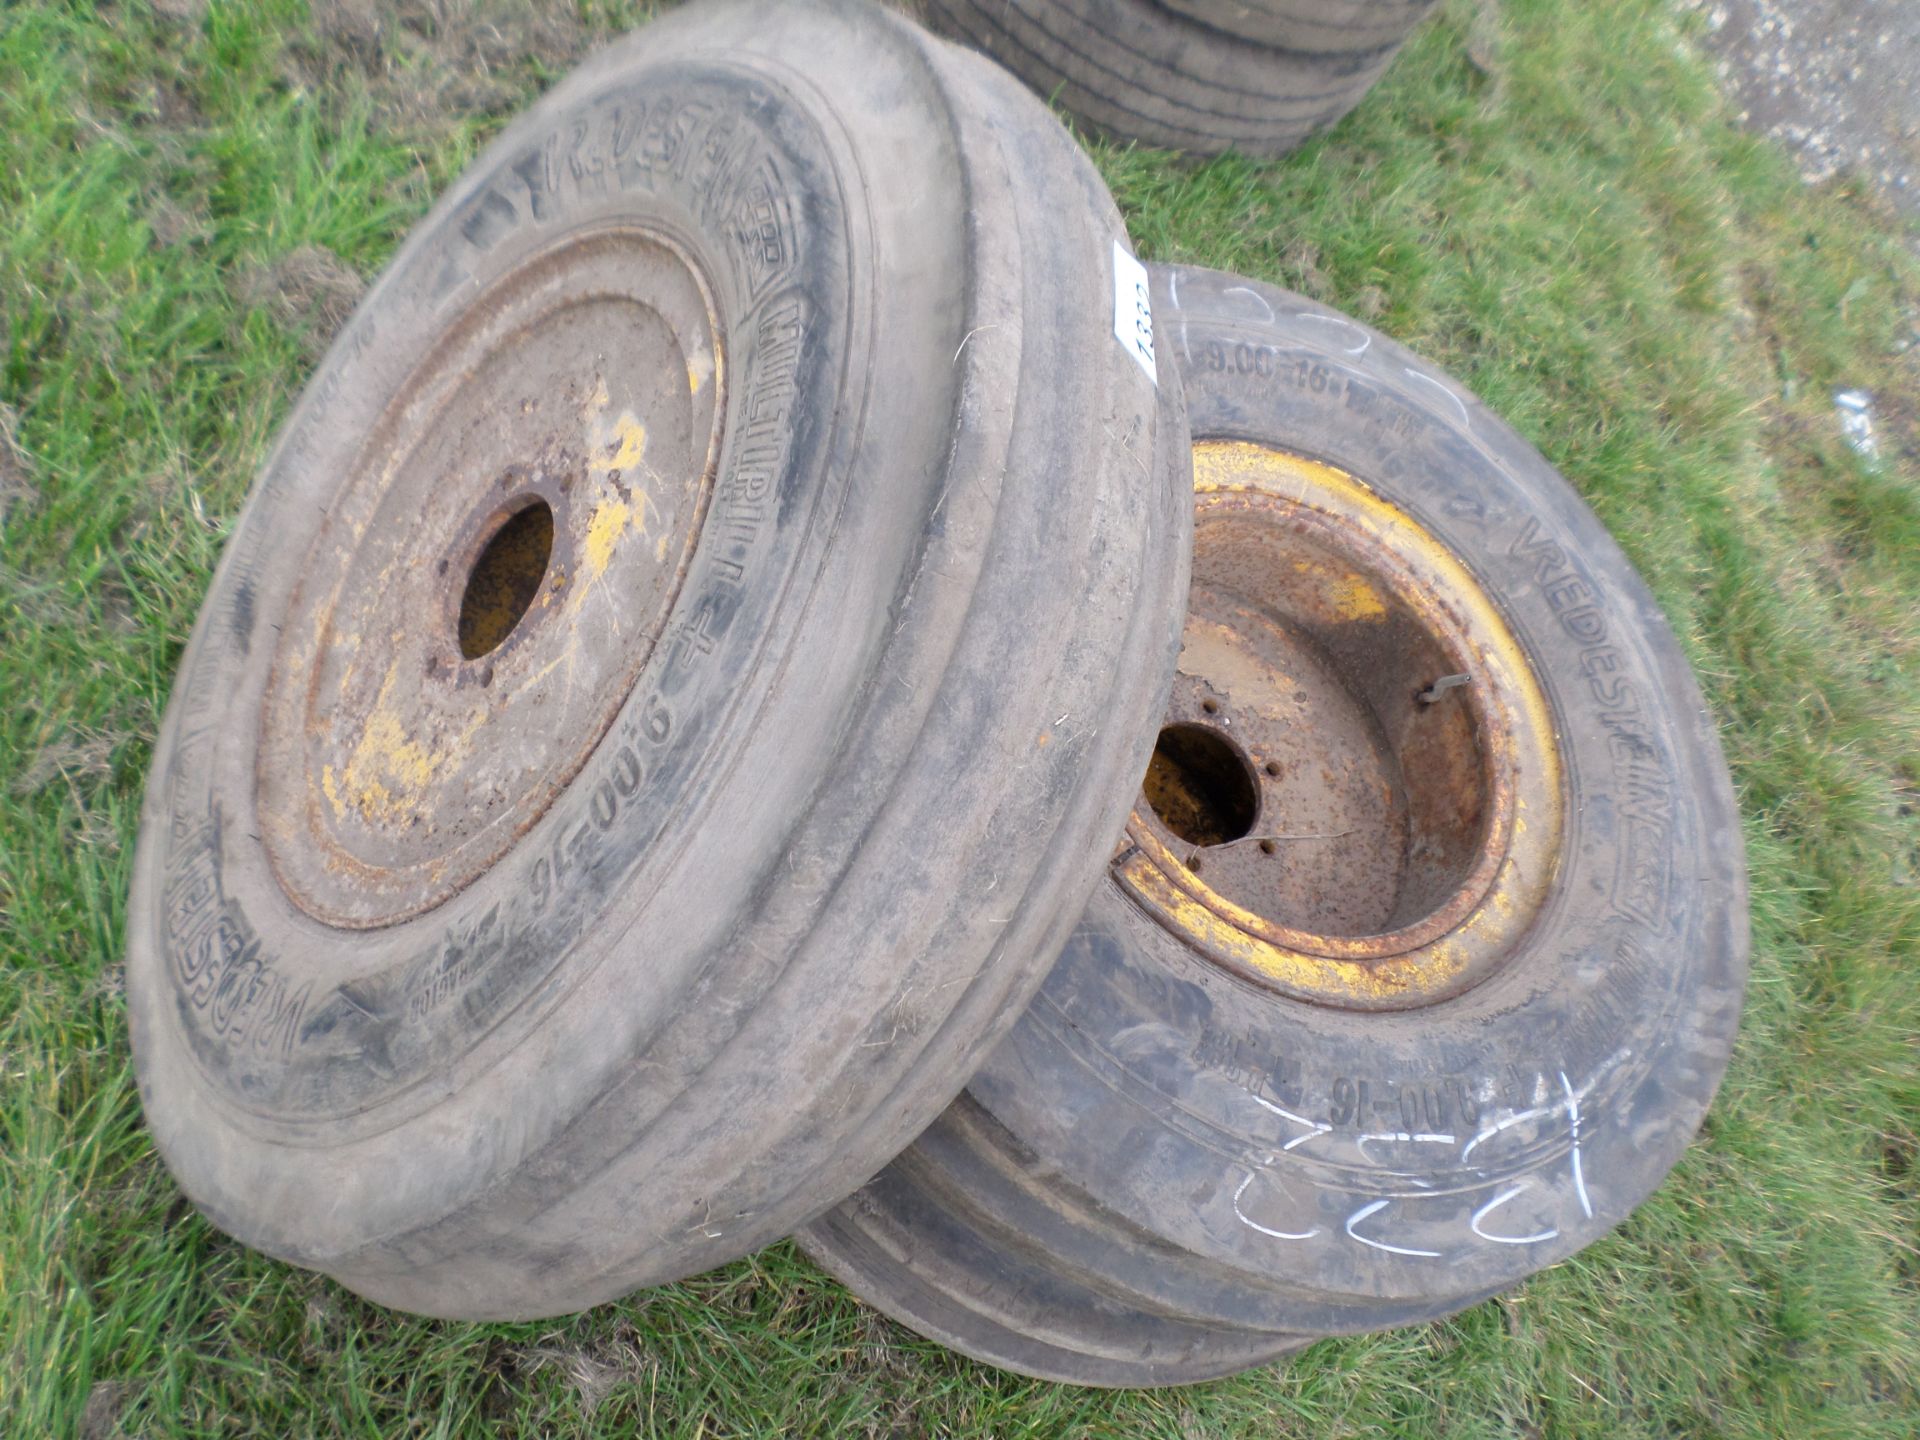 3 ribbed tyres 900/16 - Image 2 of 3